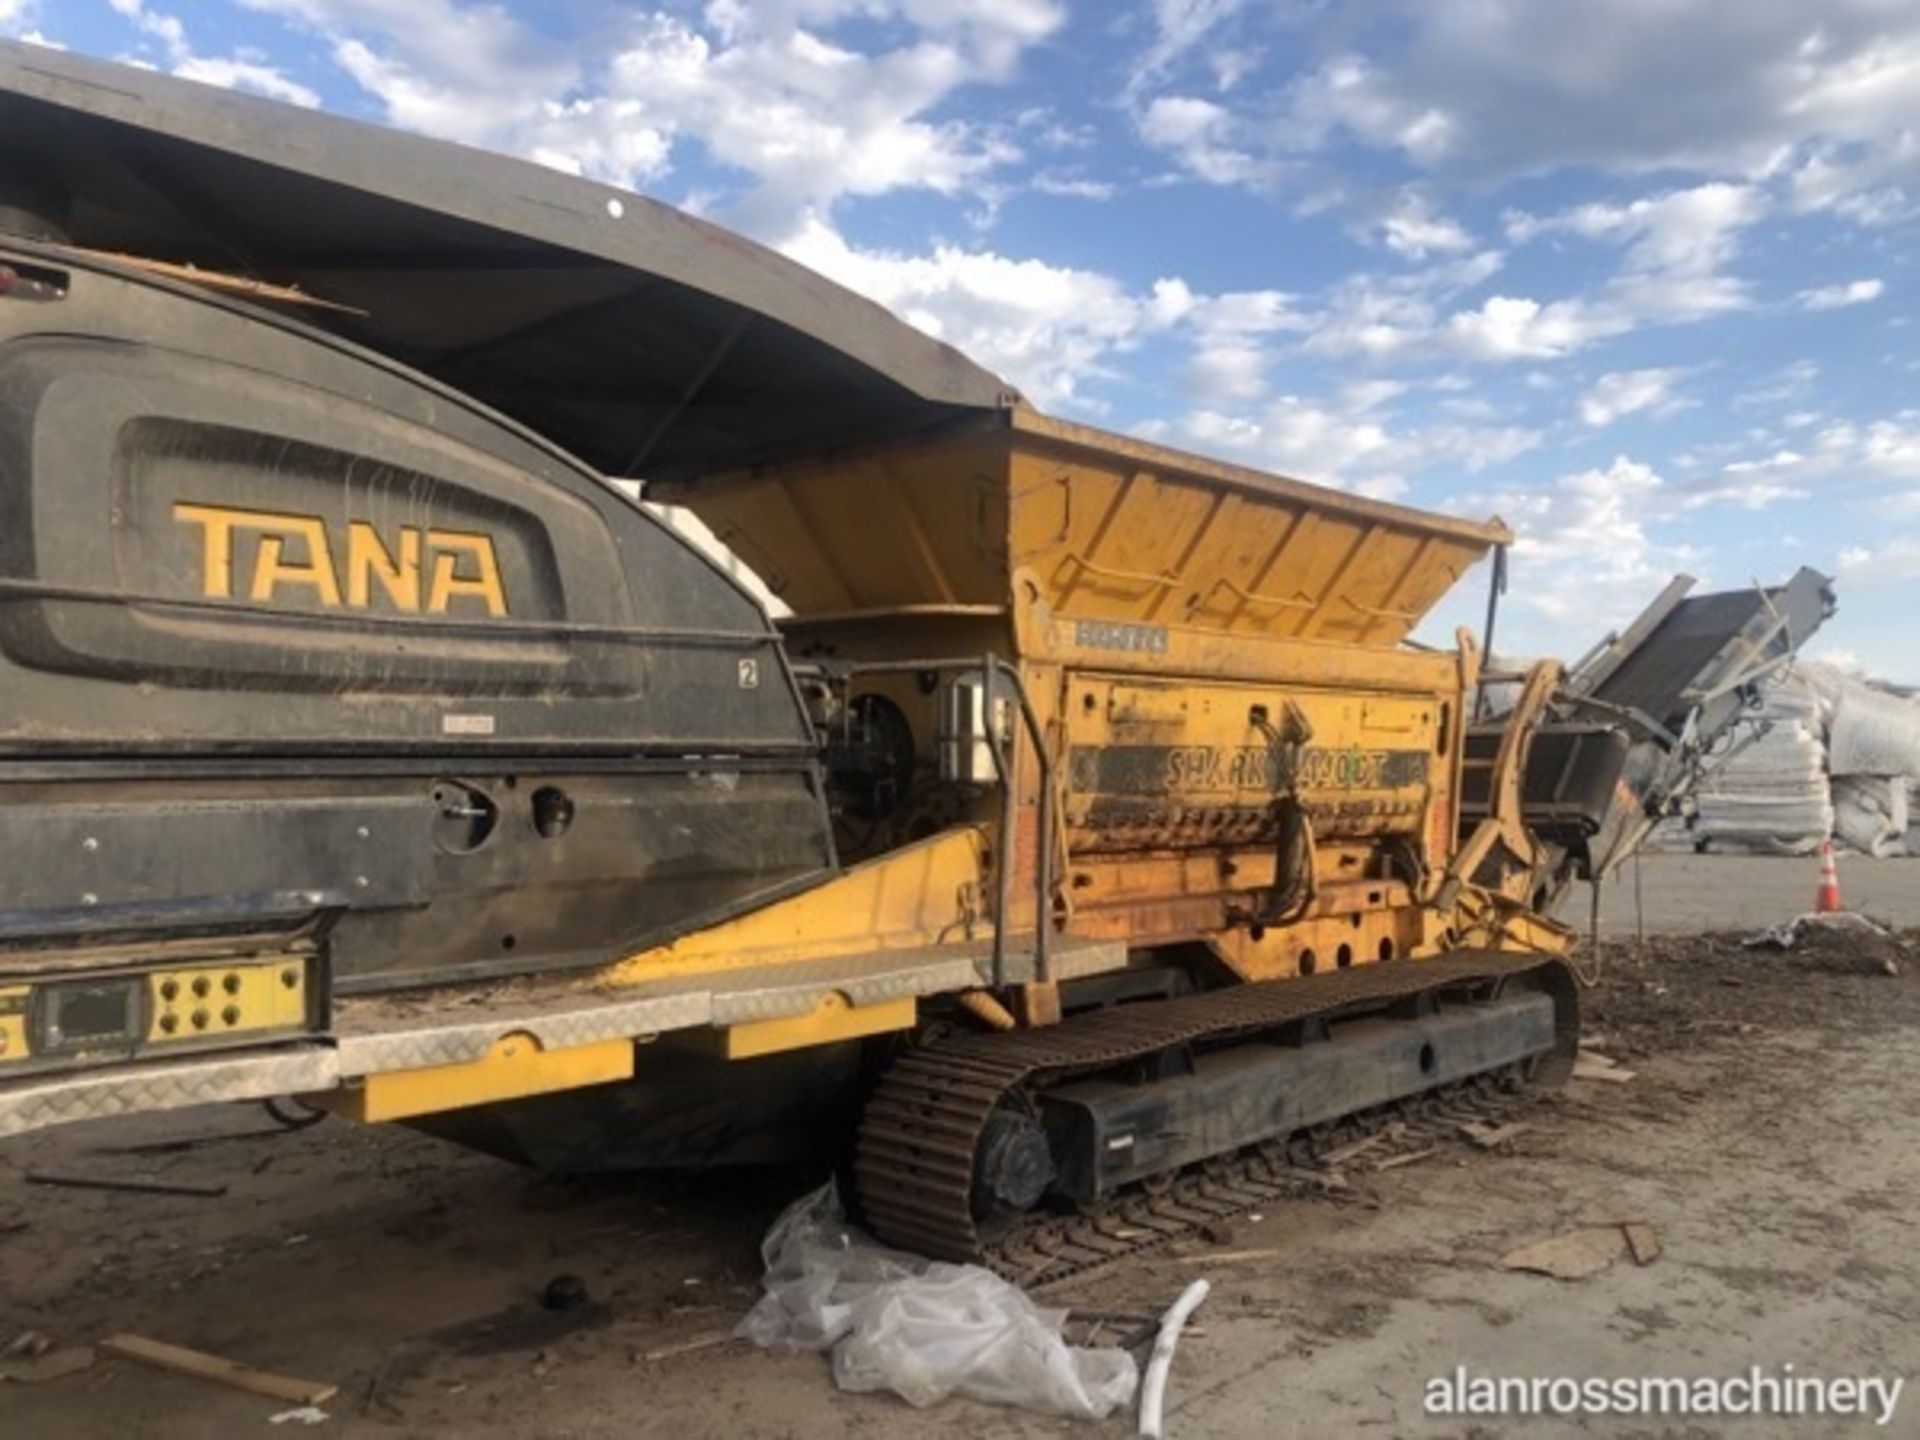 (Located in Fresno, CA, US) 4400DT Used Tana Shark Portable Shredder, 118" Wide Cutting Chamber (